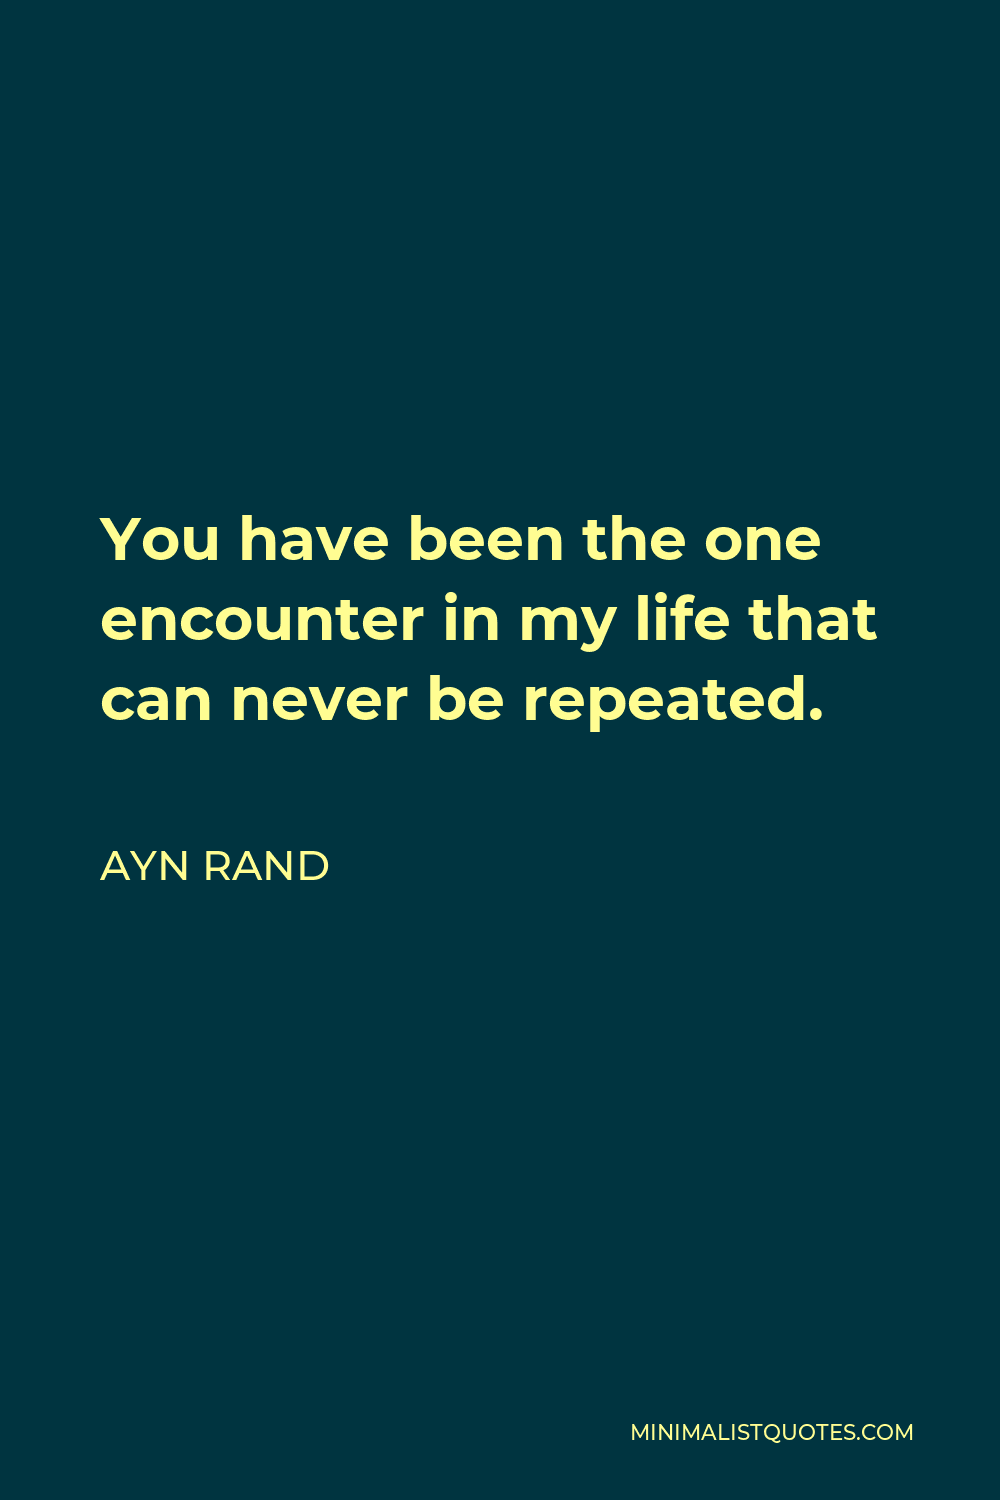 Ayn Rand Quote - You have been the one encounter in my life that can never be repeated.